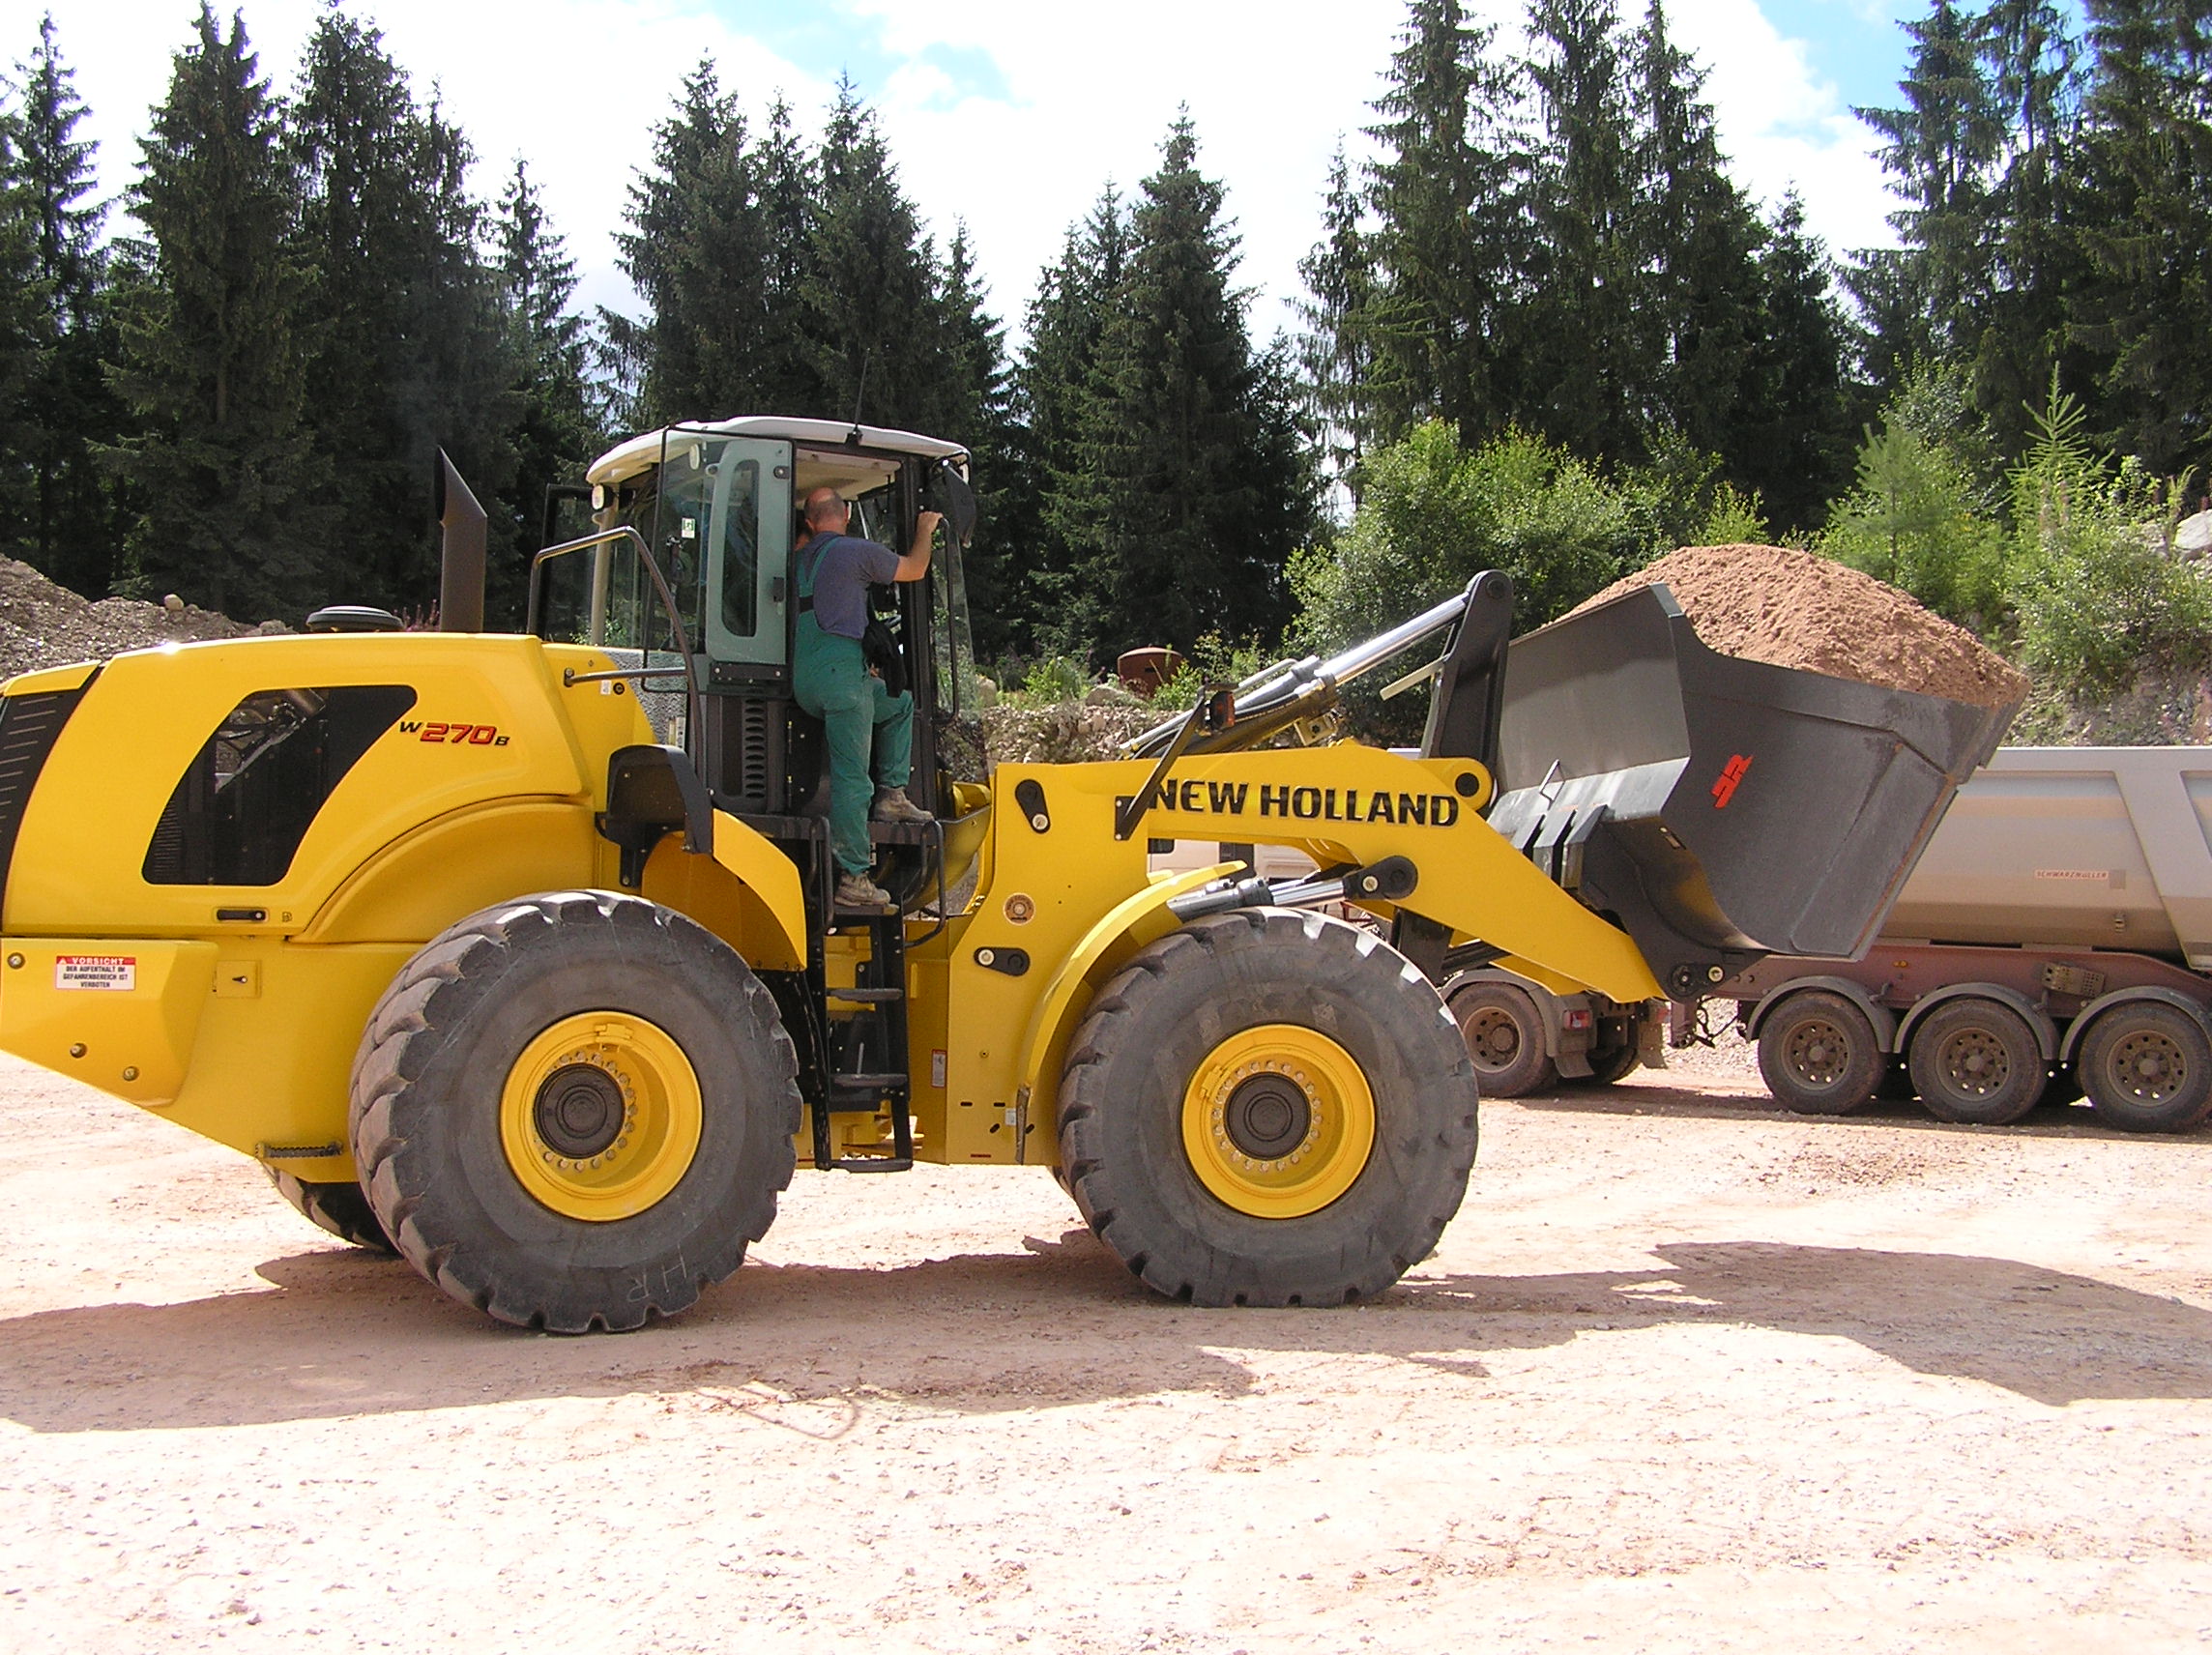 New Holland Construction/CNH Global Post-4277-1195414072